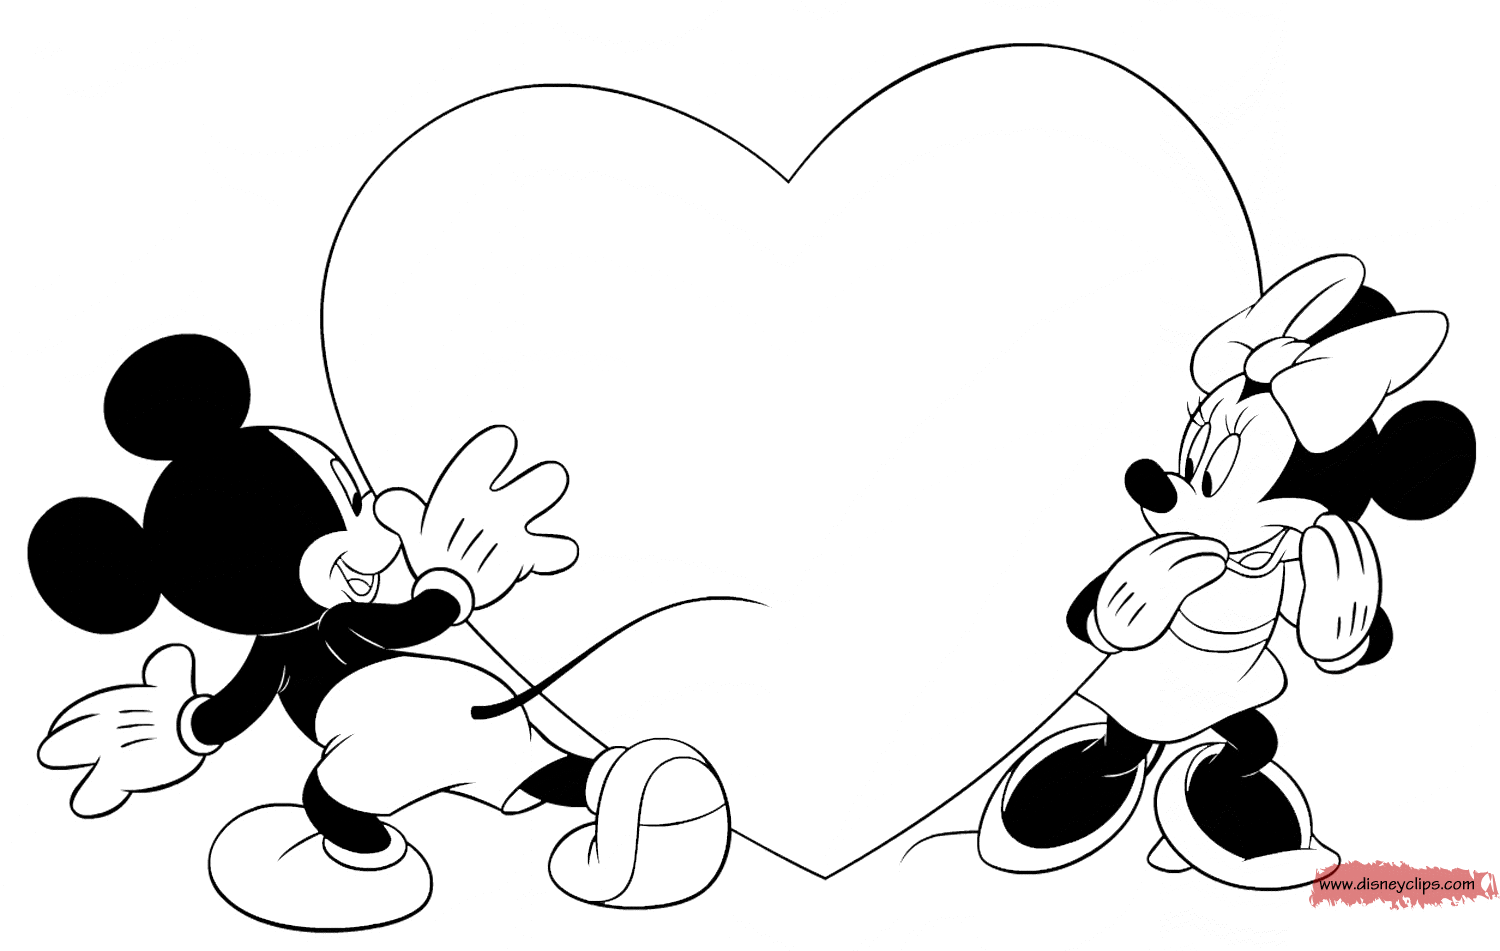 Disney Valentine's Day Printable Coloring Pages   Disney Coloring ...